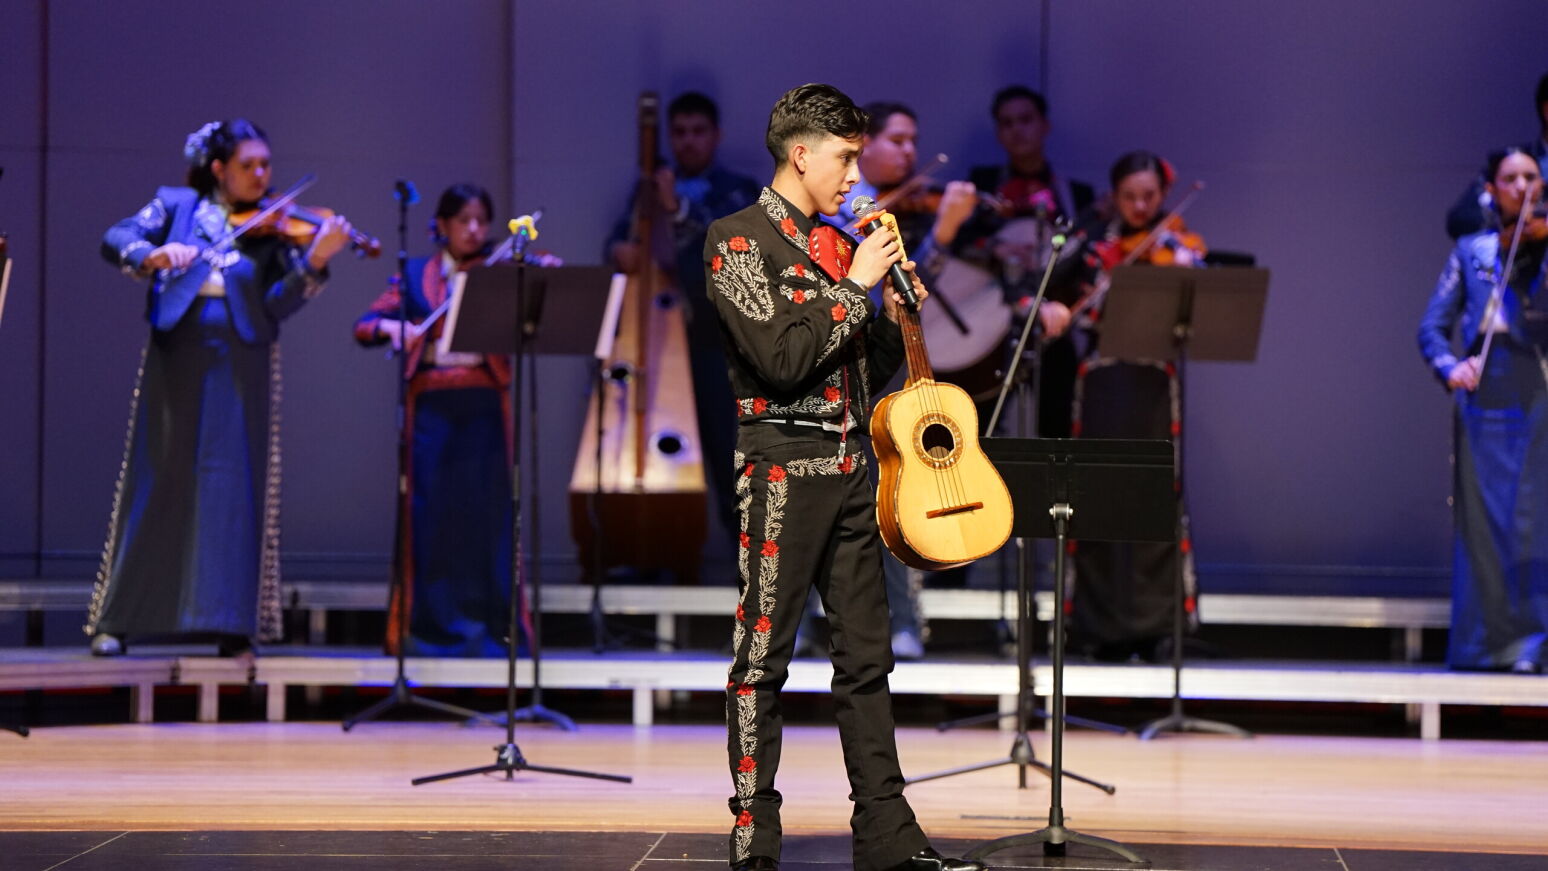 A student gets ready for his solo, holding his guitar and a microphone